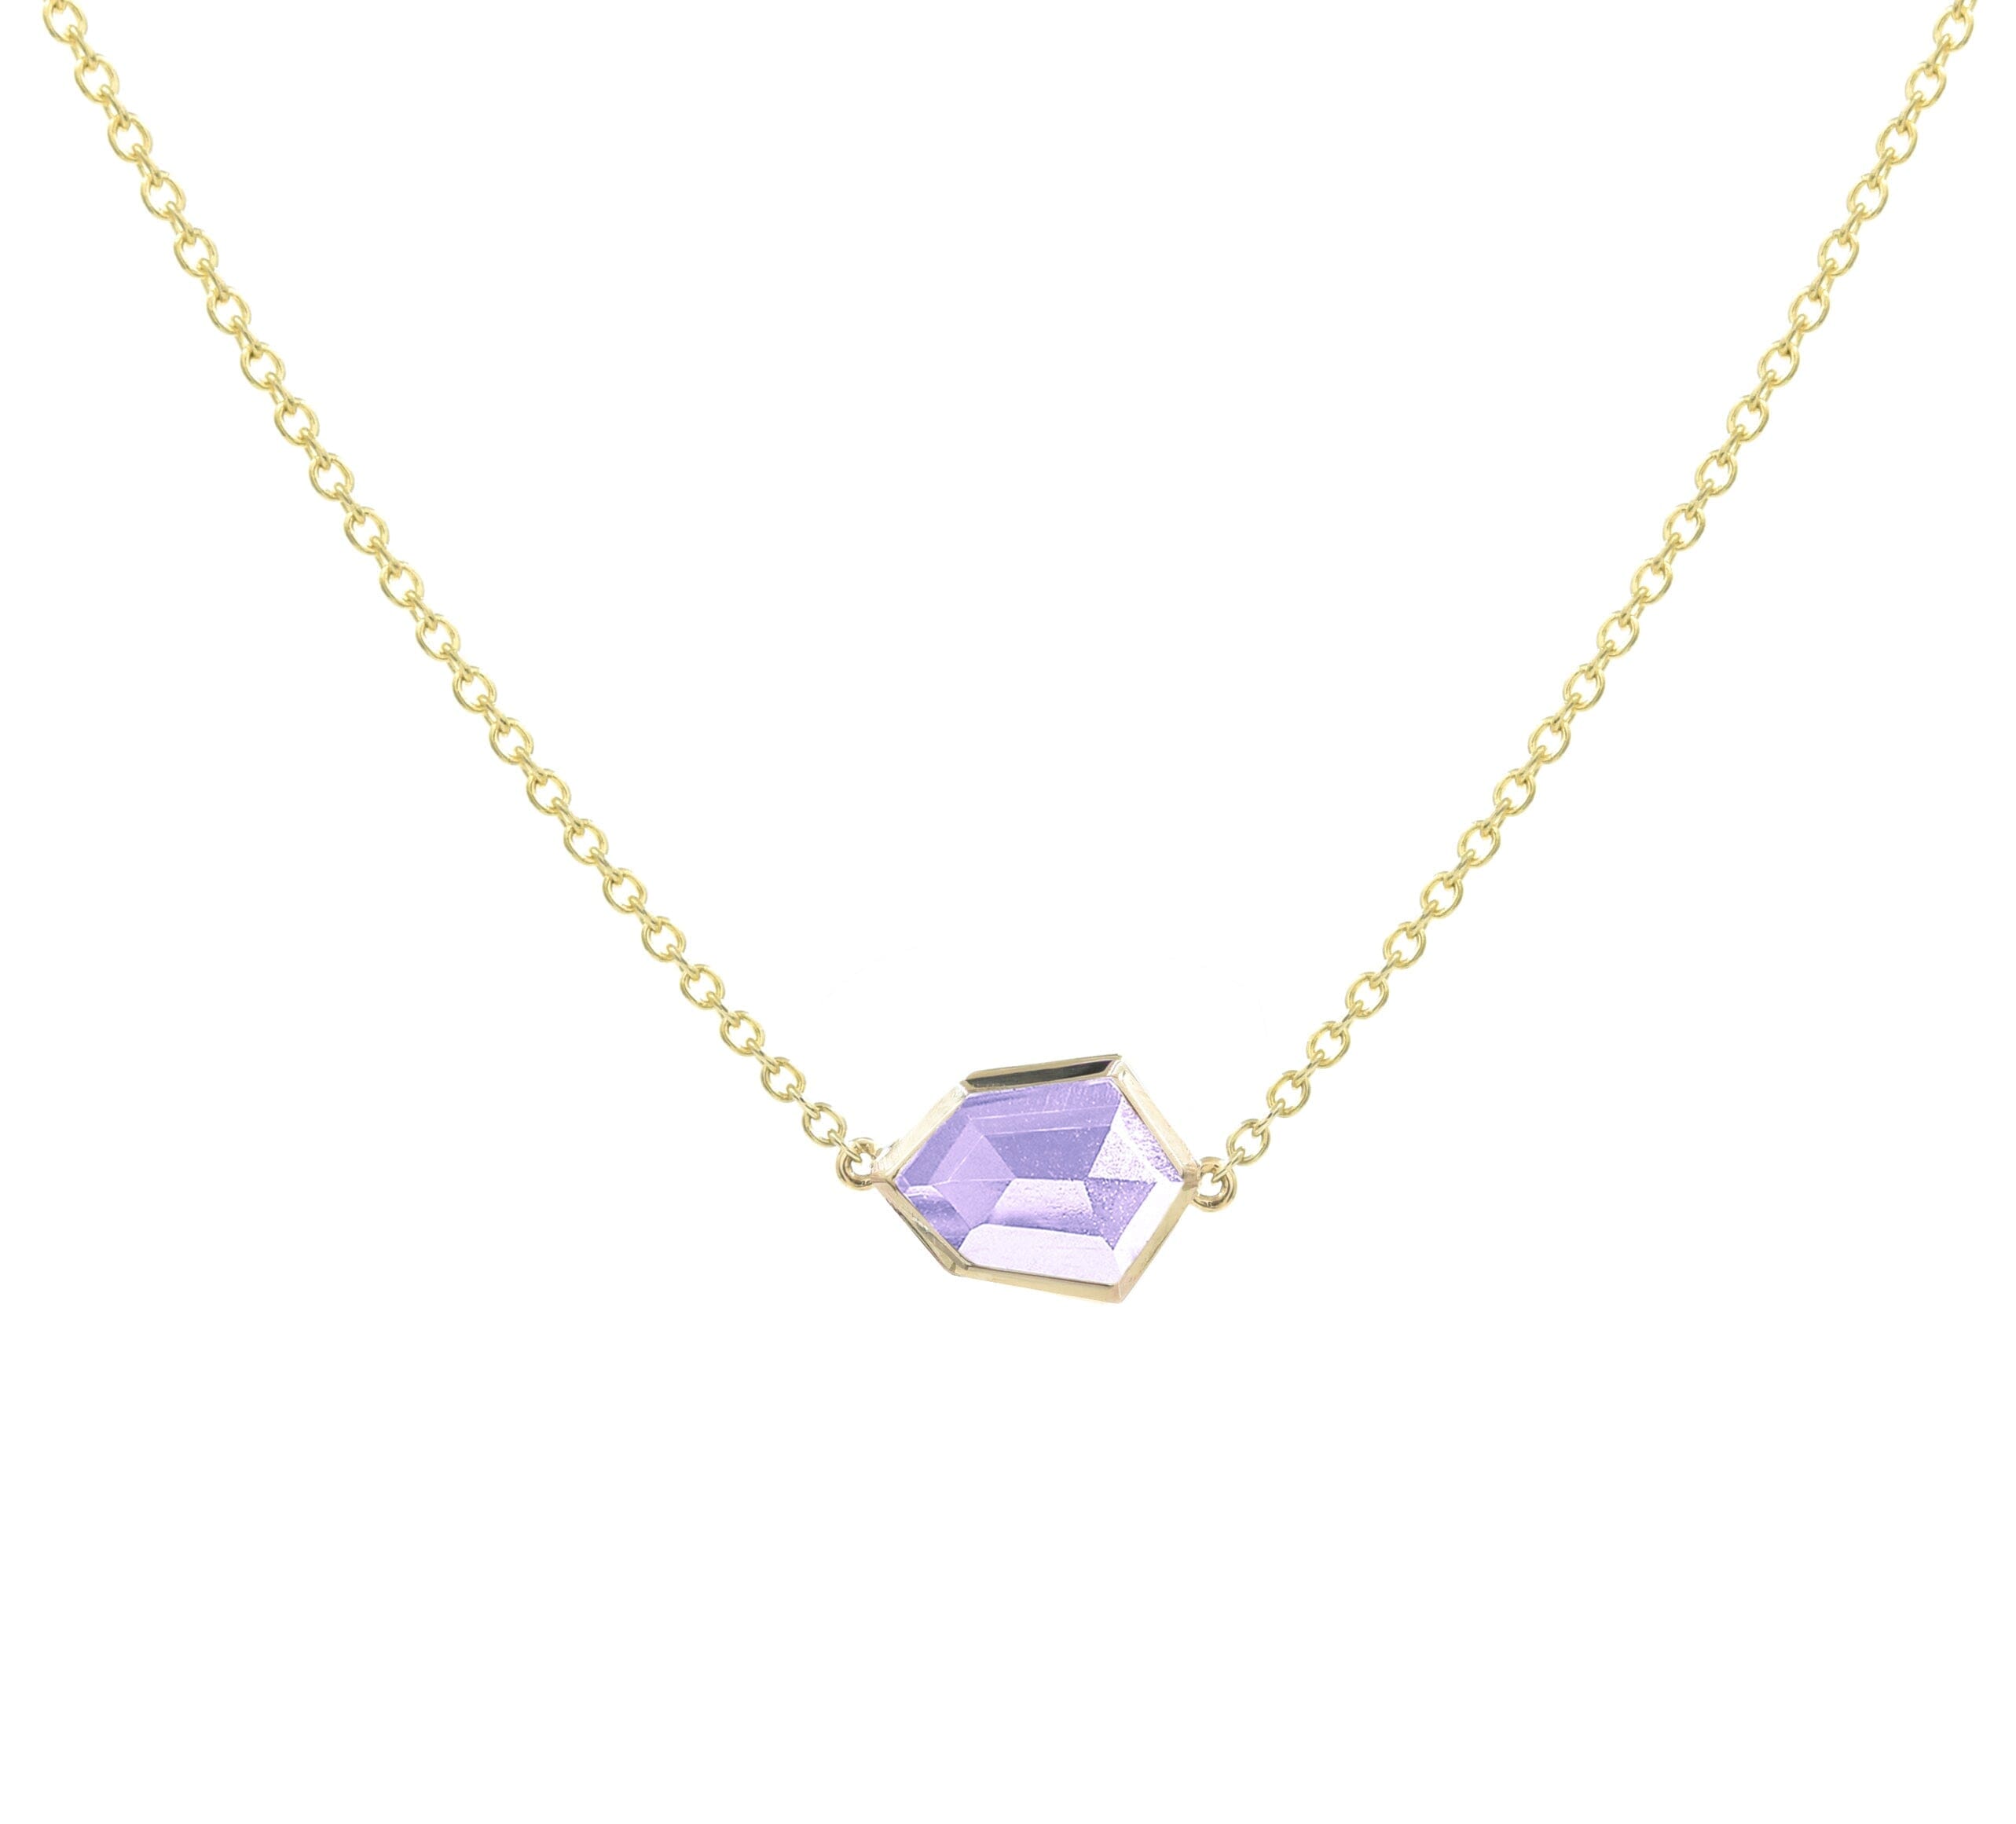 Soothing Amethyst Shield Jollie Necklace Necklaces - BONDEYE JEWELRY ®